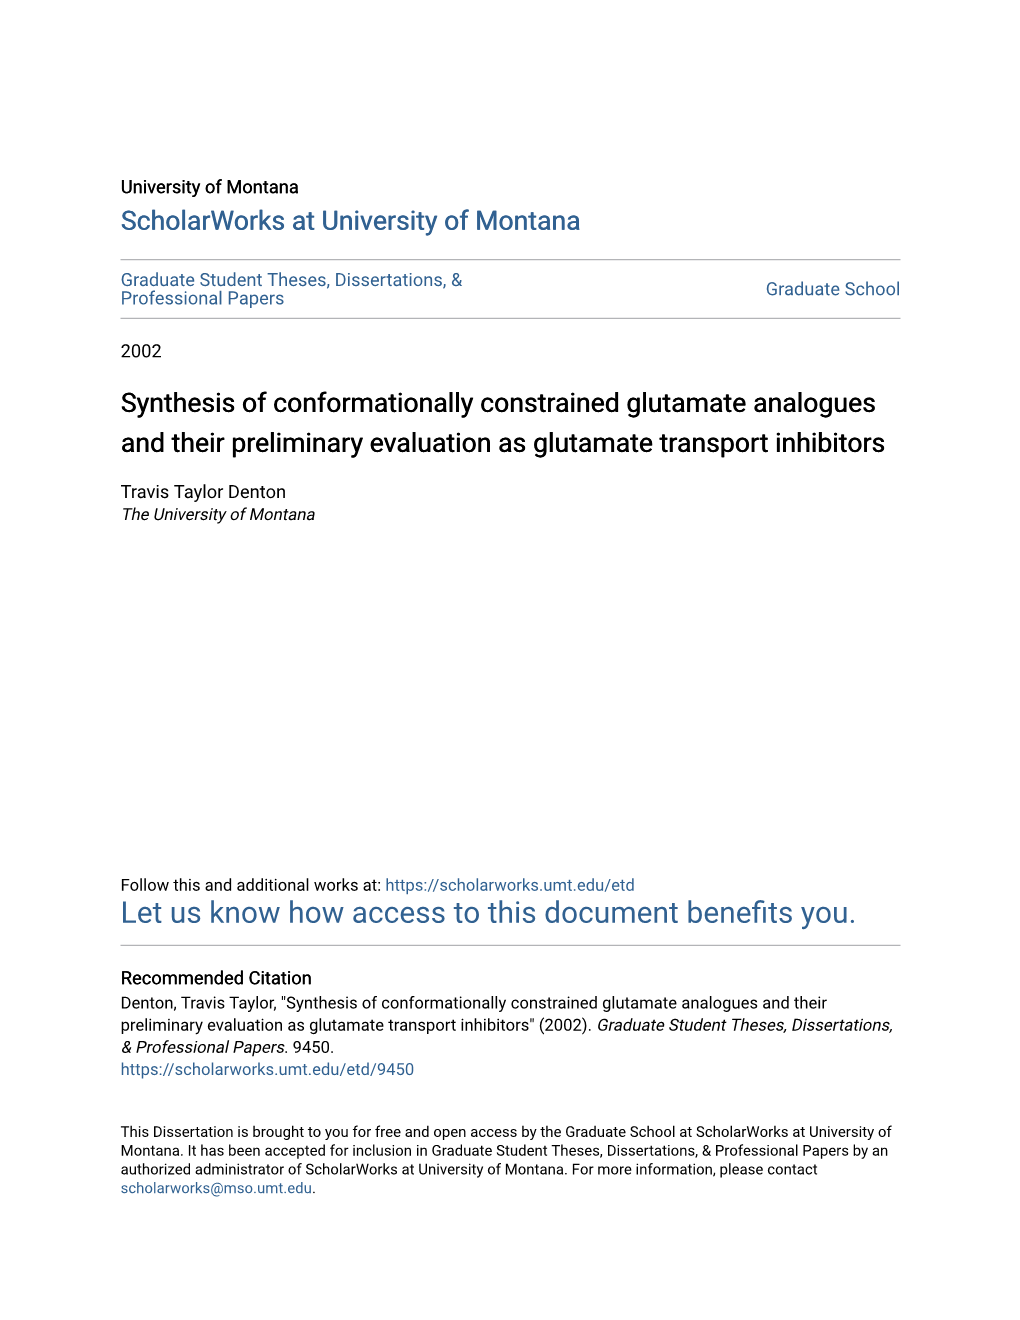 Synthesis of Conformationally Constrained Glutamate Analogues and Their Preliminary Evaluation As Glutamate Transport Inhibitors